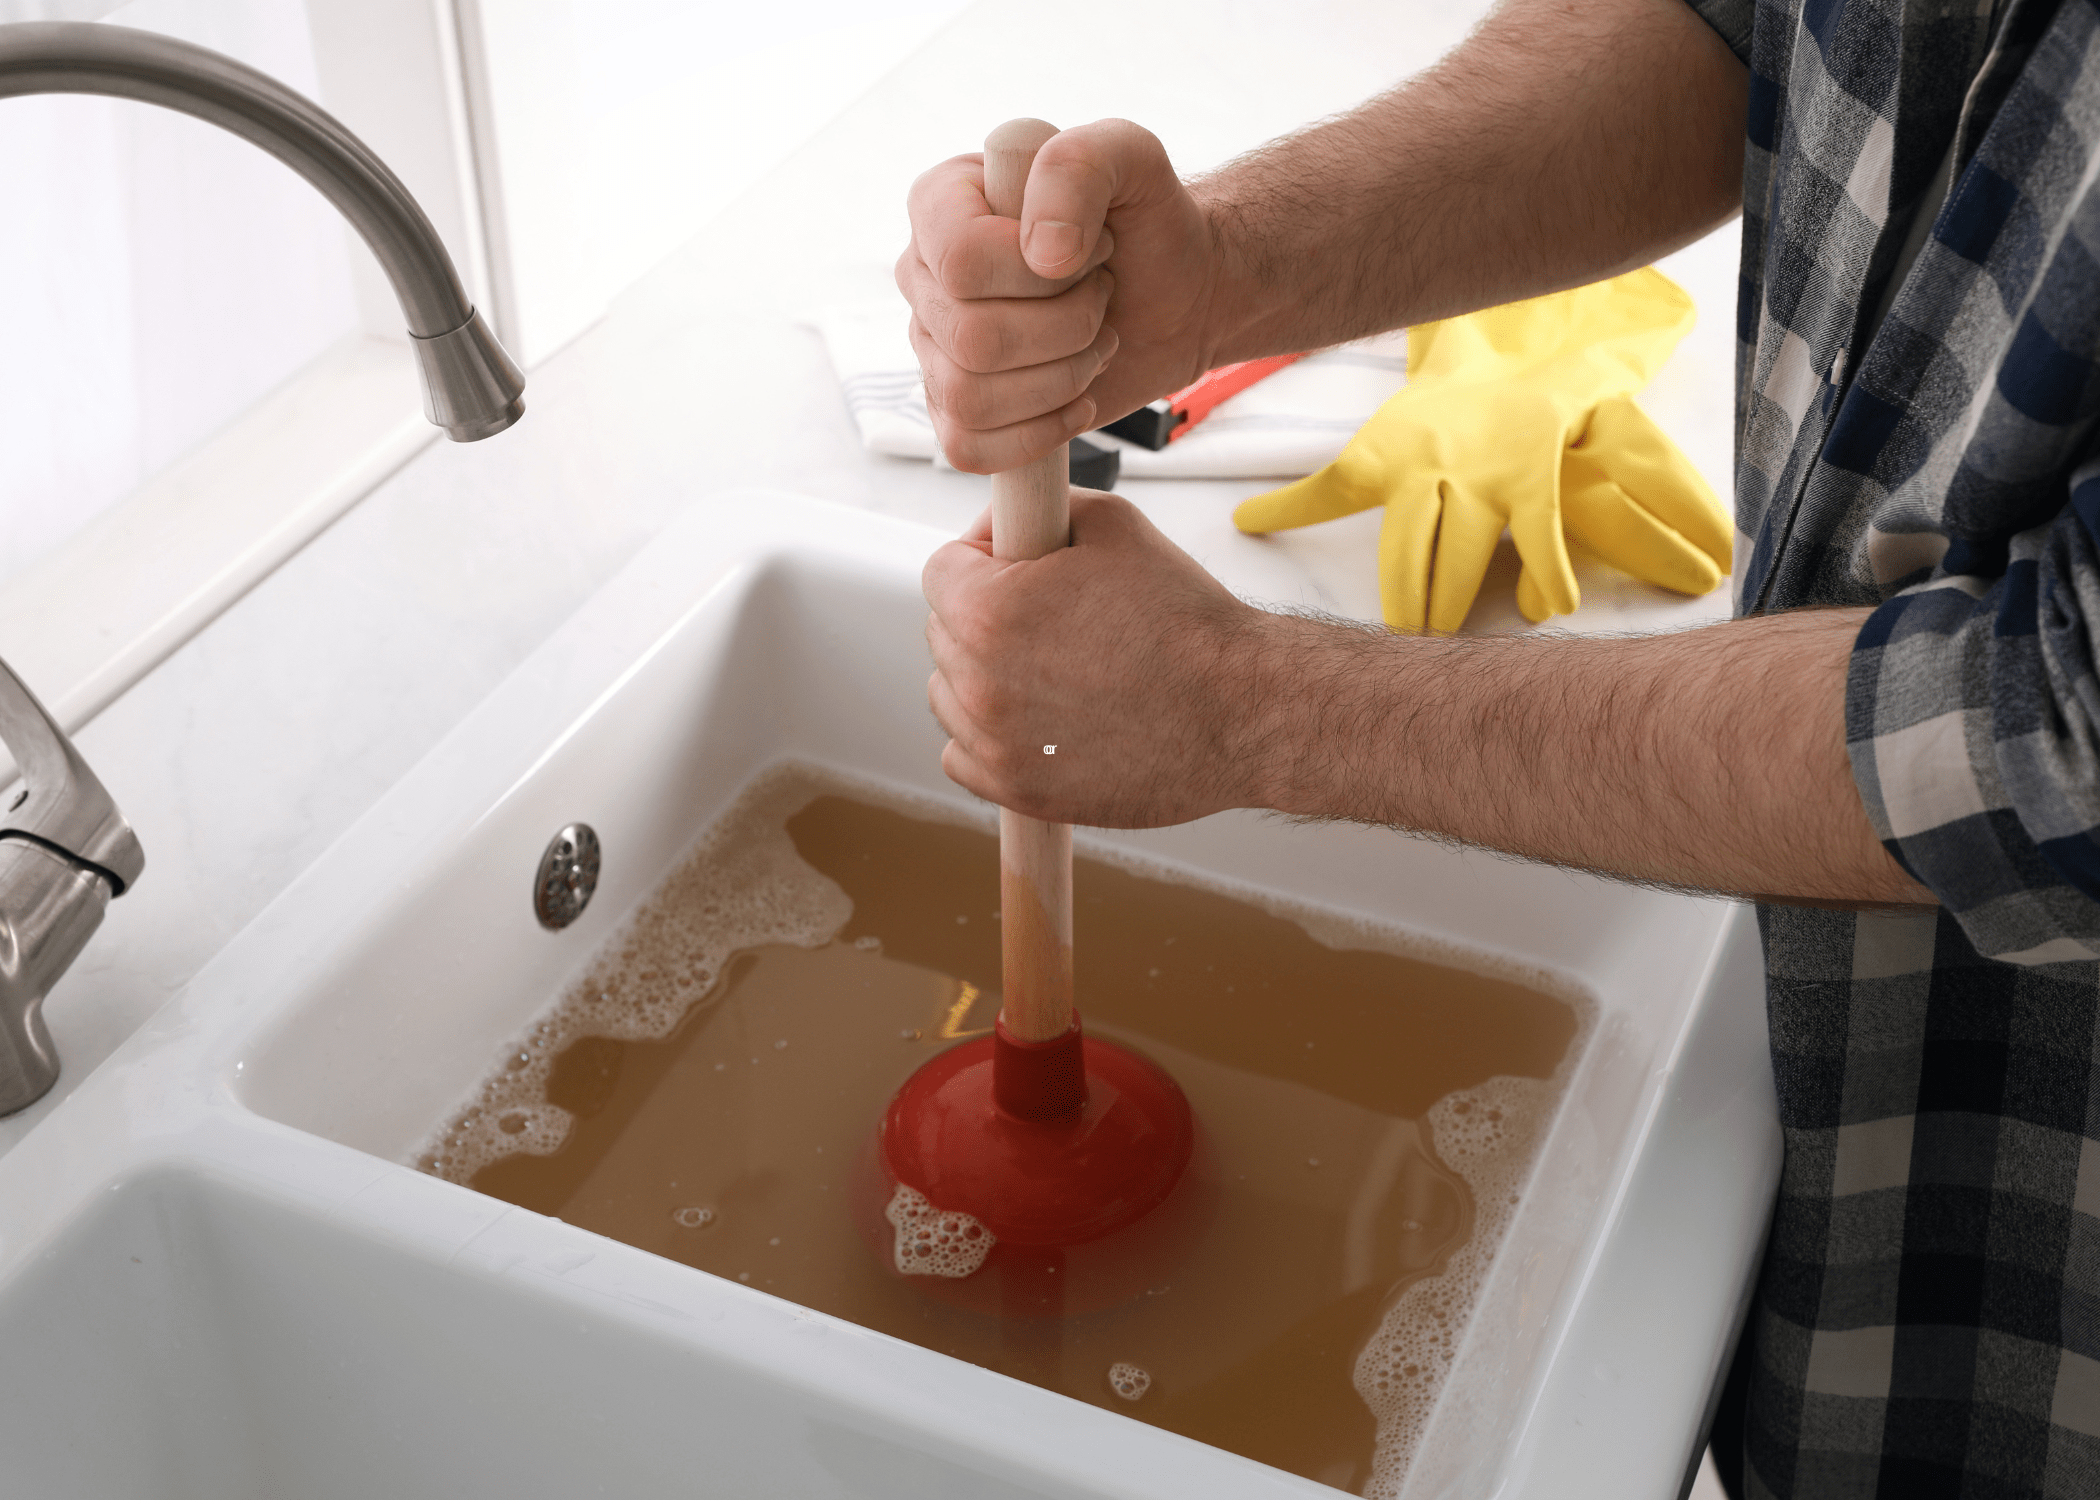 Effective Strategies to Prevent Clogs and Maintain a Healthy Plumbing System